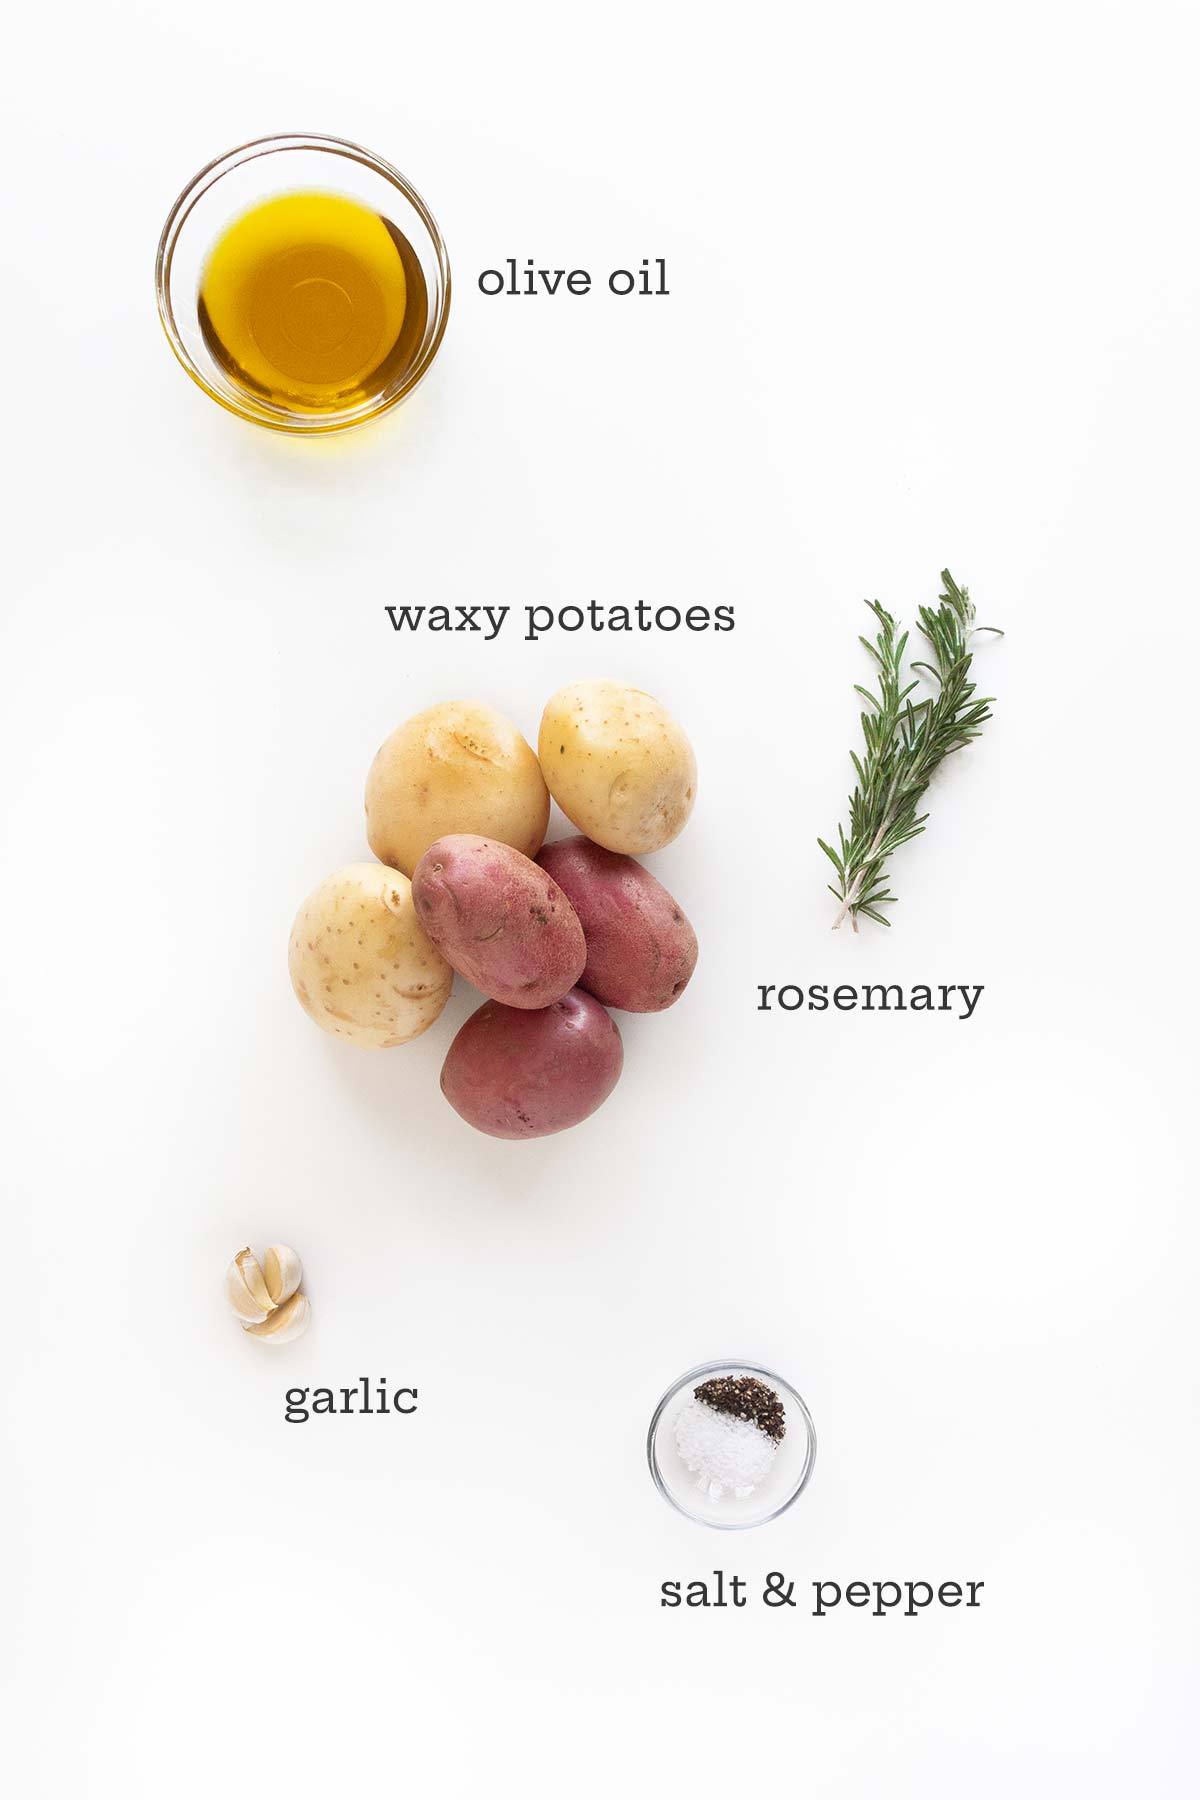 Ingredients for roasted potatoes on the grill--waxy potatoes, oil, rosemary, garlic, and salt and pepper.